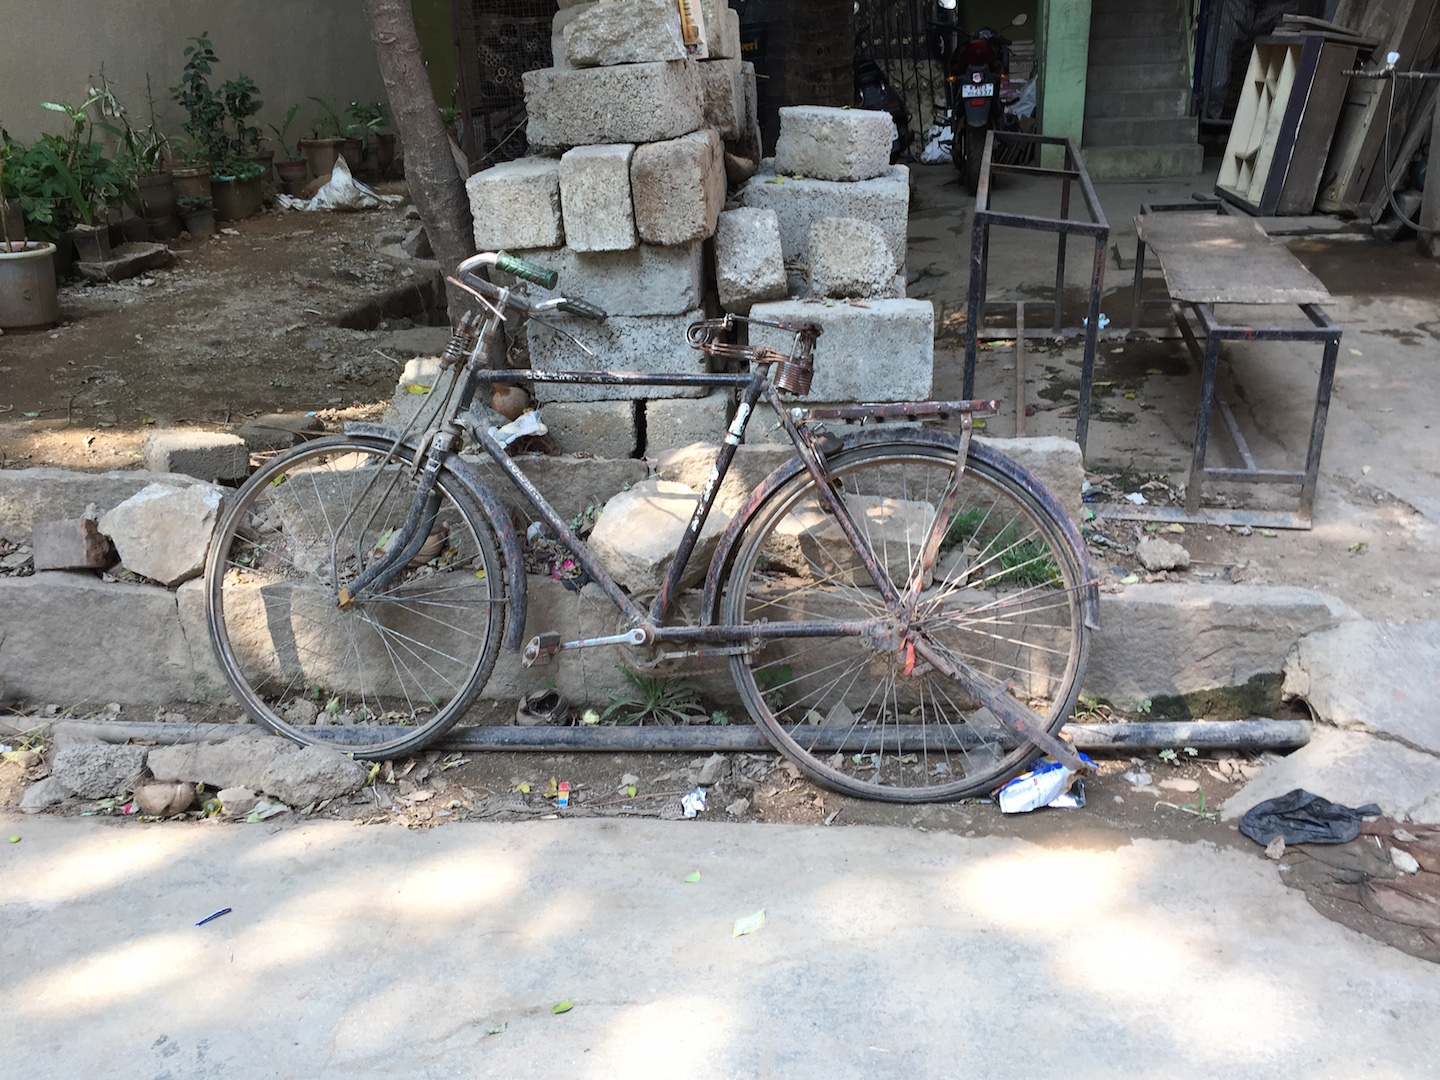 Old bike in the alleyway near the orphanage, thought looked cool for some reason.